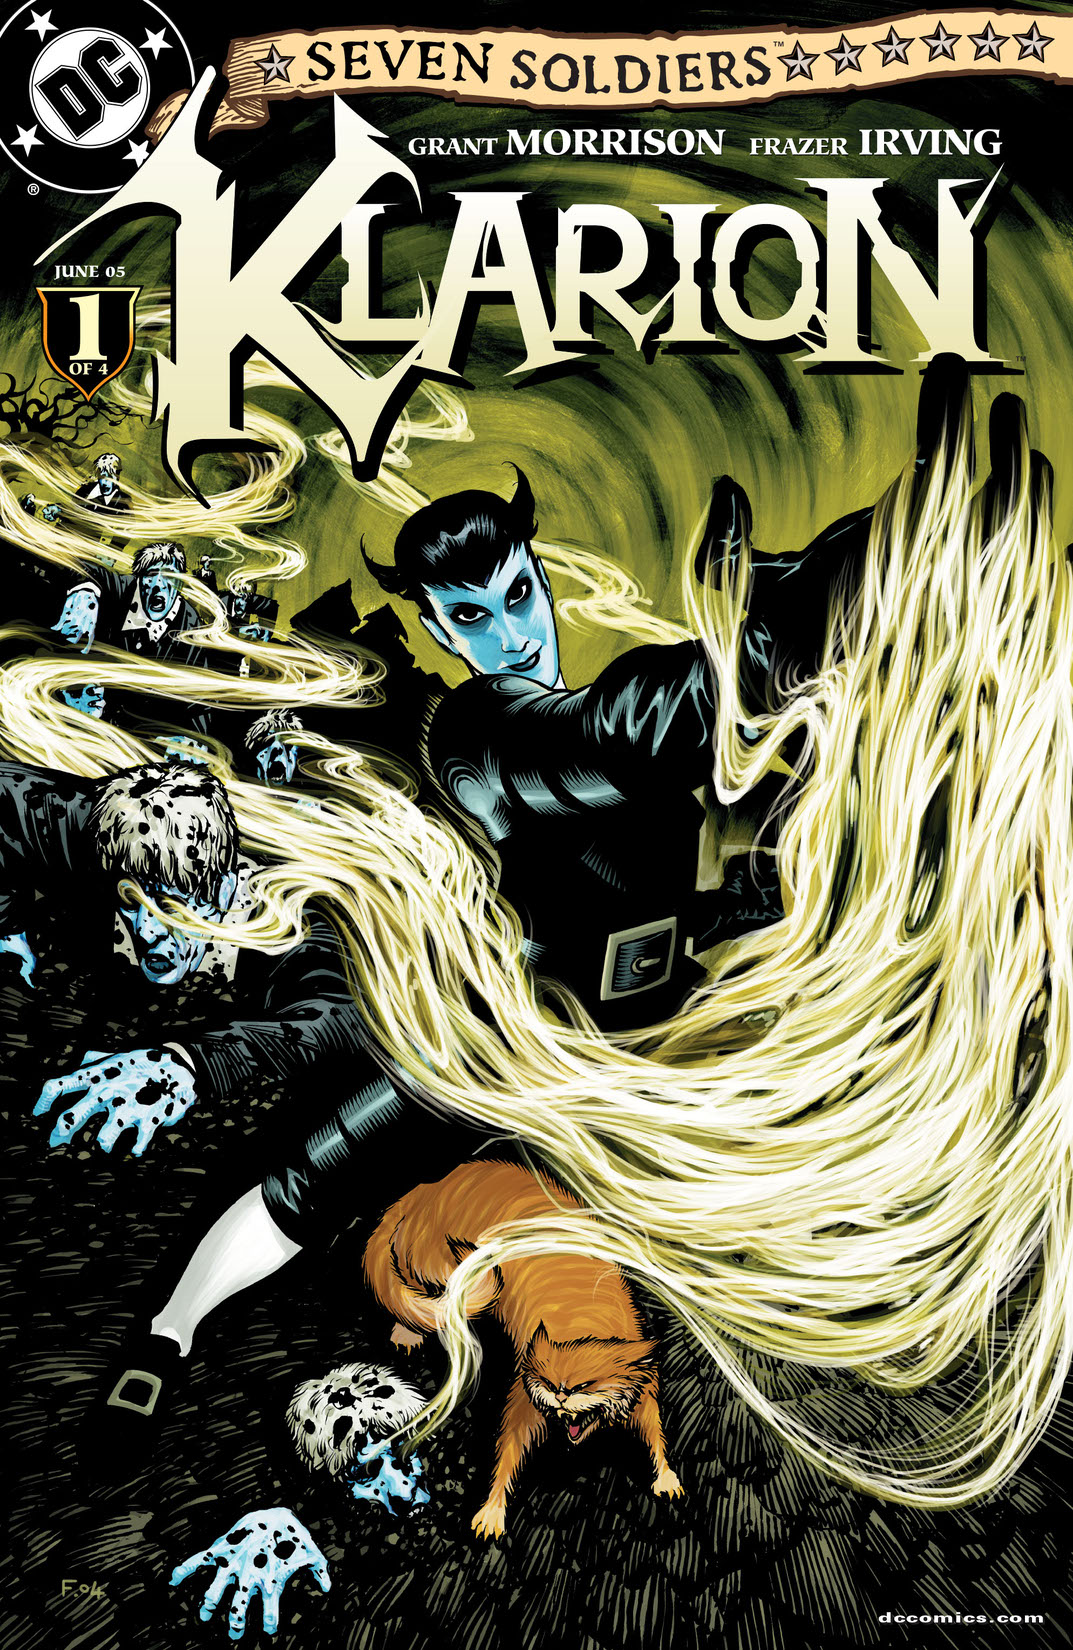 Seven Soldiers: Klarion the Witch Boy #1 preview images